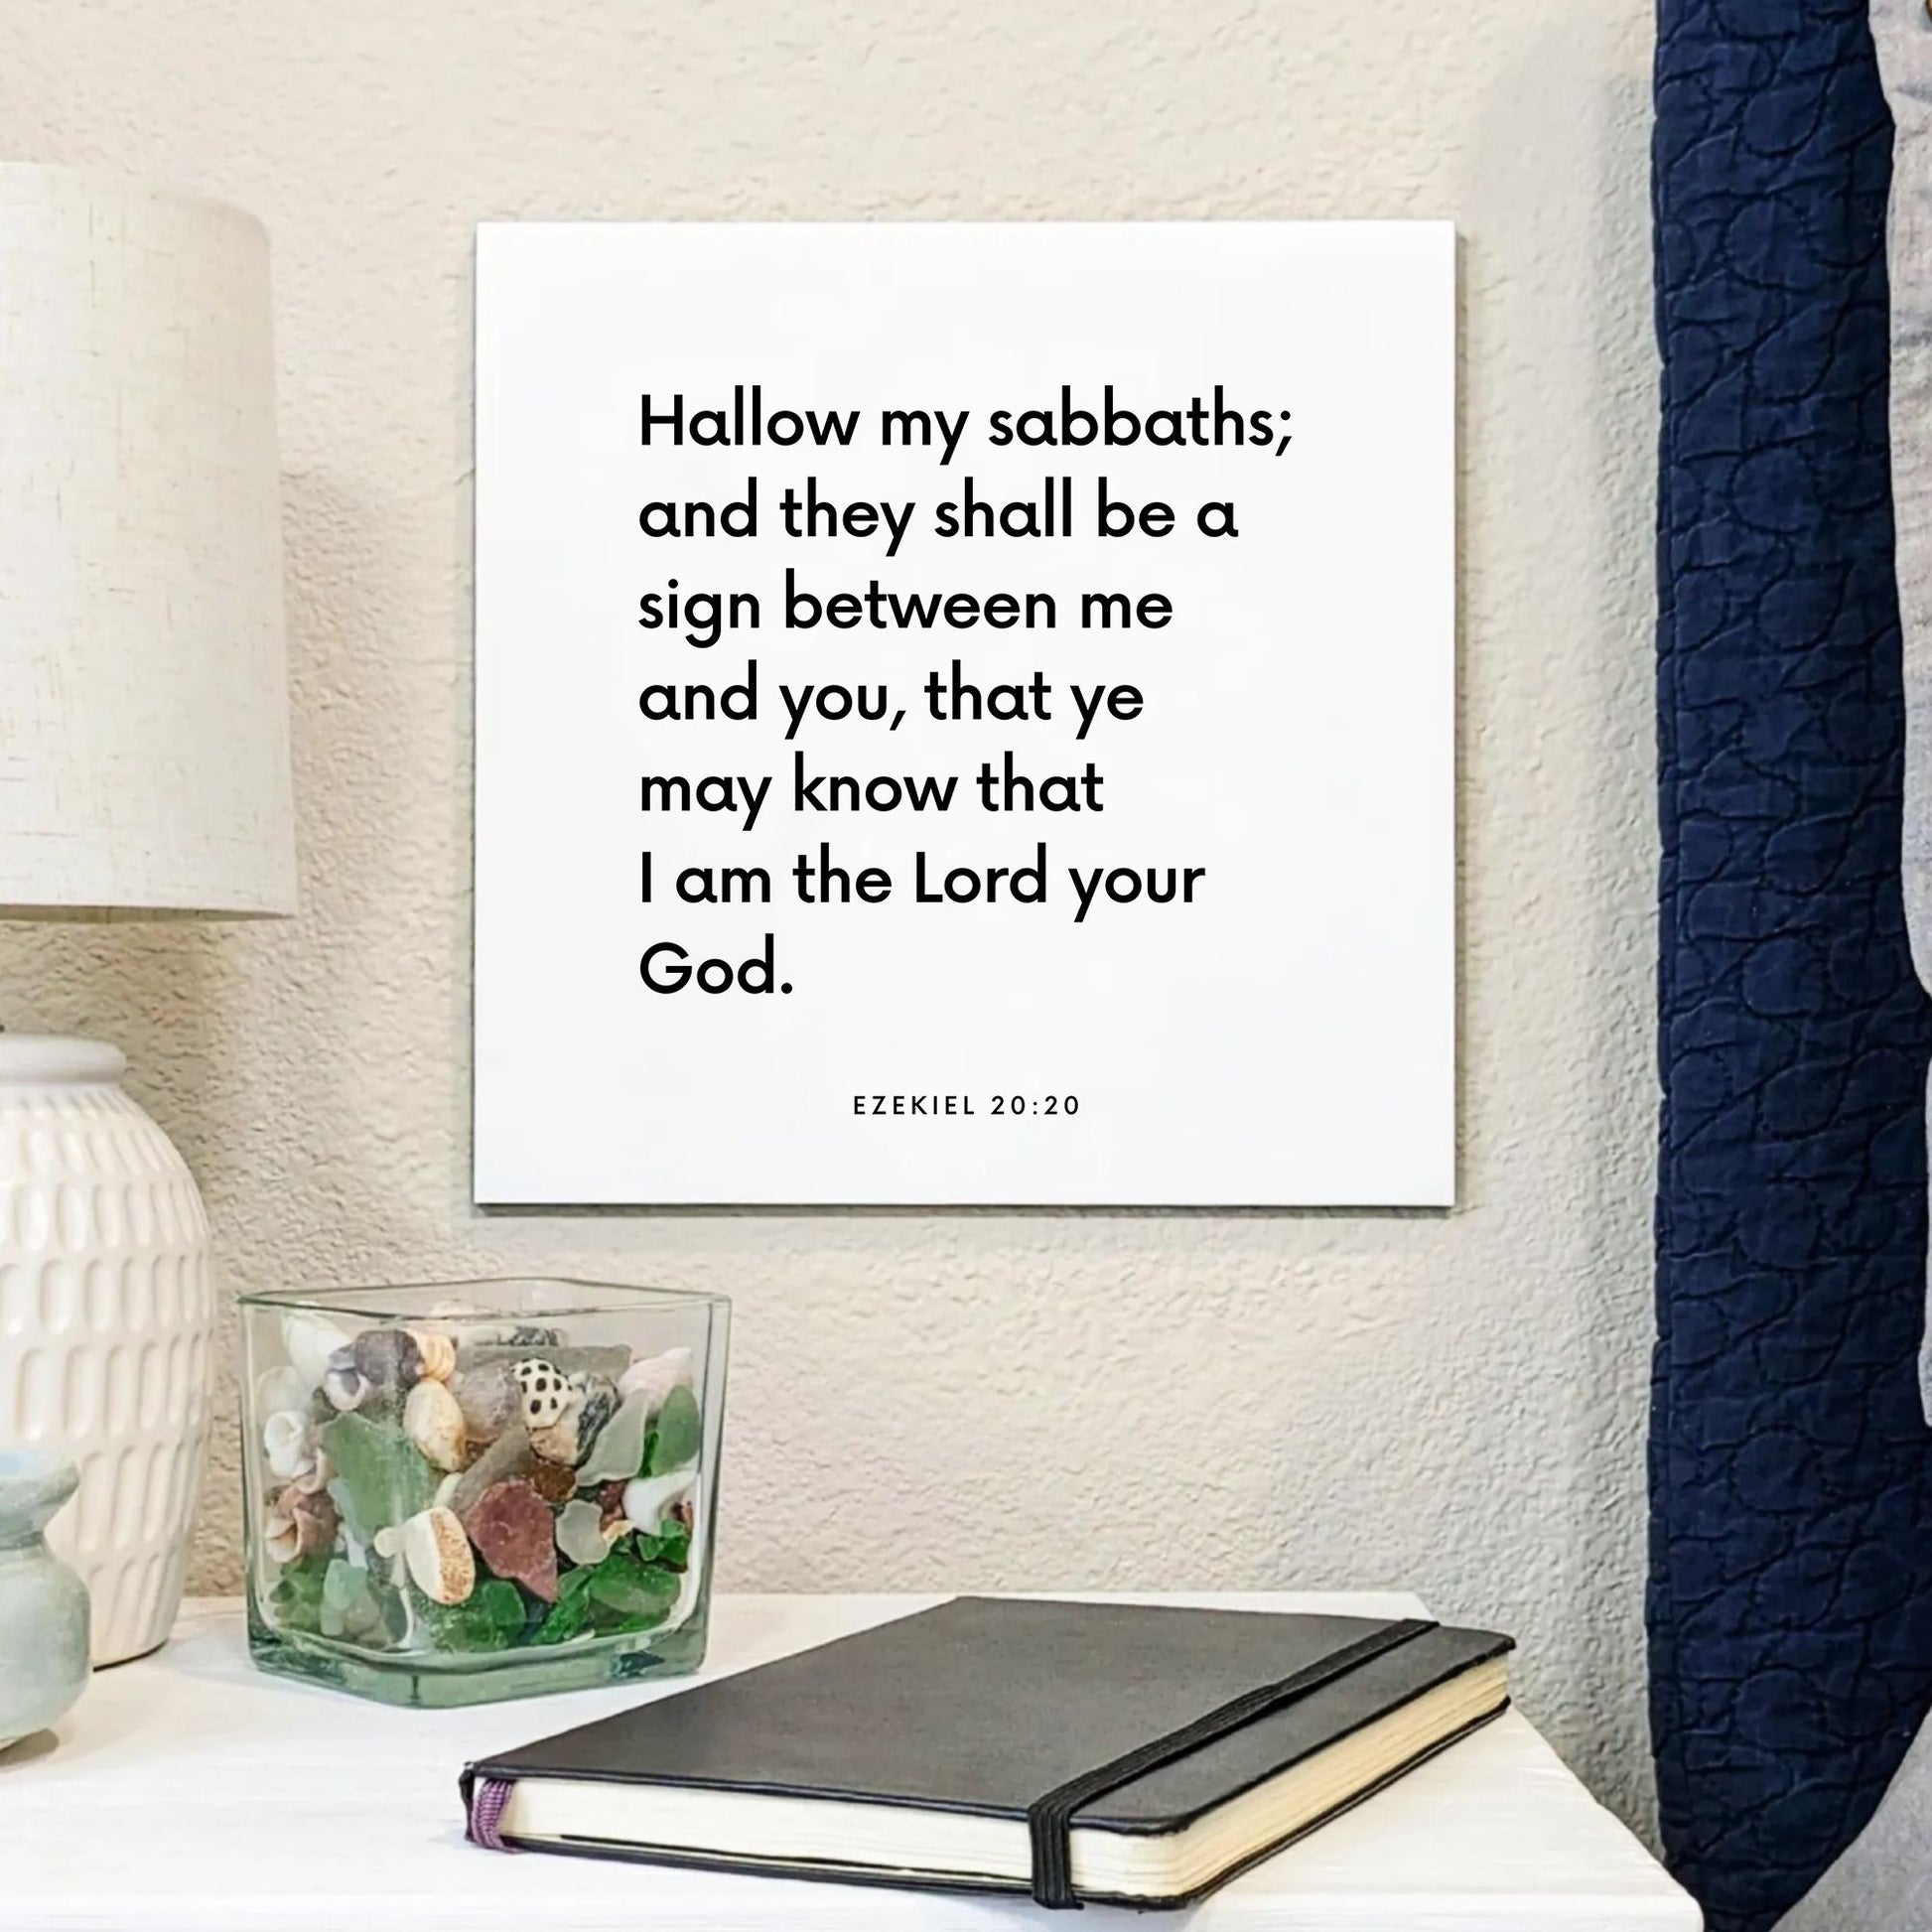 Bedside mouting of the scripture tile for Ezekiel 20:20 - "Hallow my sabbaths; and they shall be a sign"